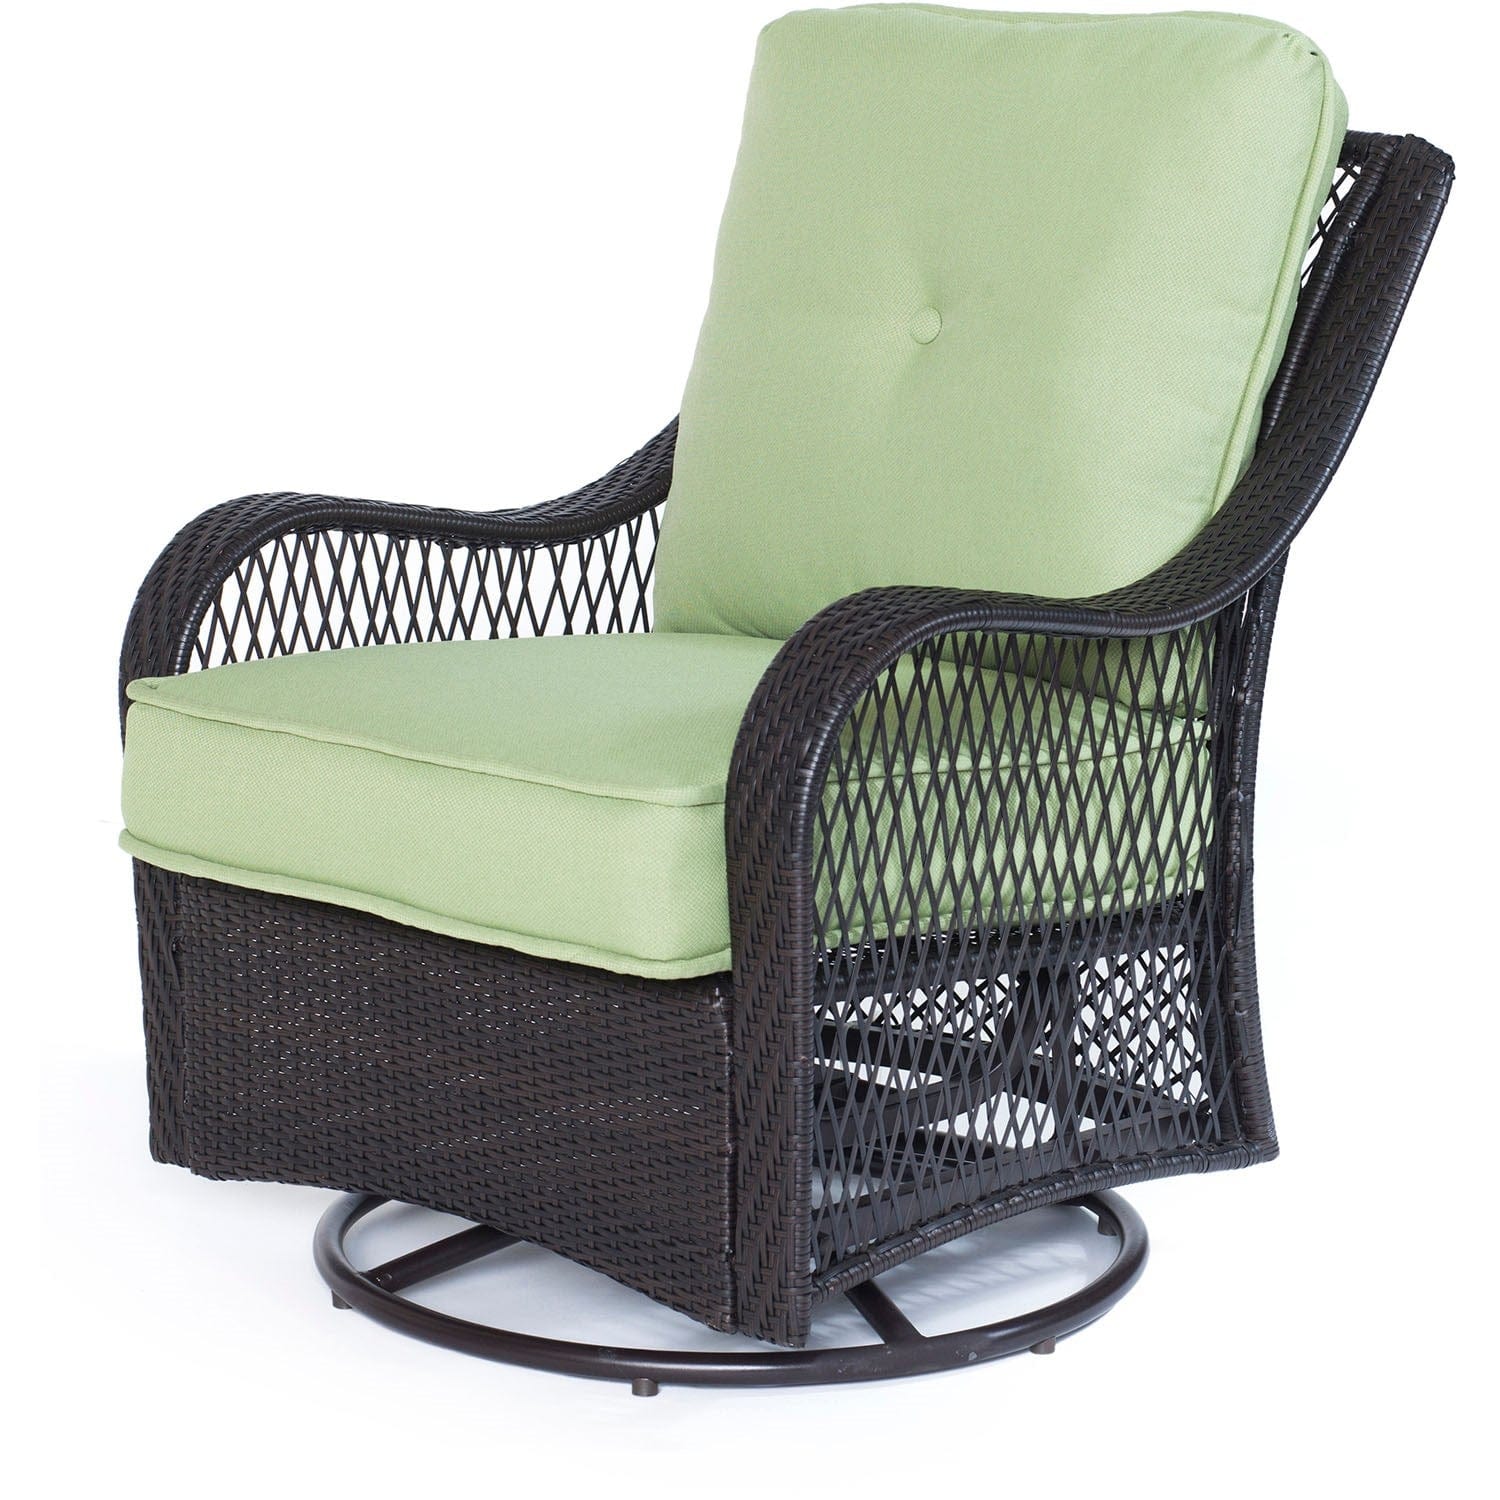 Hanover Fire Pit Chat Set Hanover Orleans 5-Piece Fire Pit Chat Set with a 40,000 BTU Fire Pit Table and 4 Woven Swivel Gliders in Avocado Green | 37x37 | ORL5PCSW4SQFP-GRN